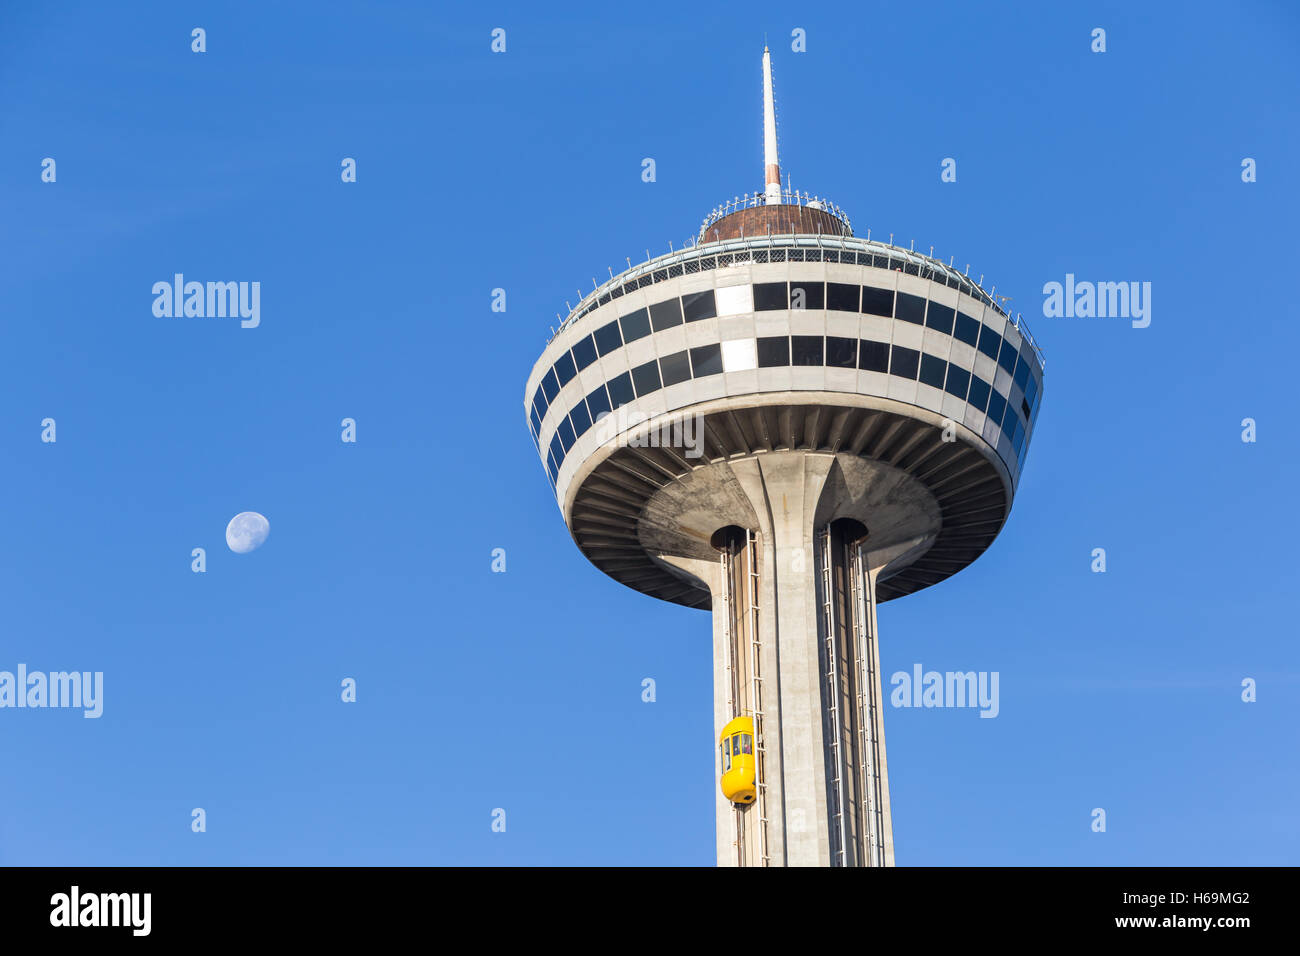 An outside elevator carries tourists to the observation deck of Skylon Tower in Niagara Falls, Ontario, Canada. Stock Photo